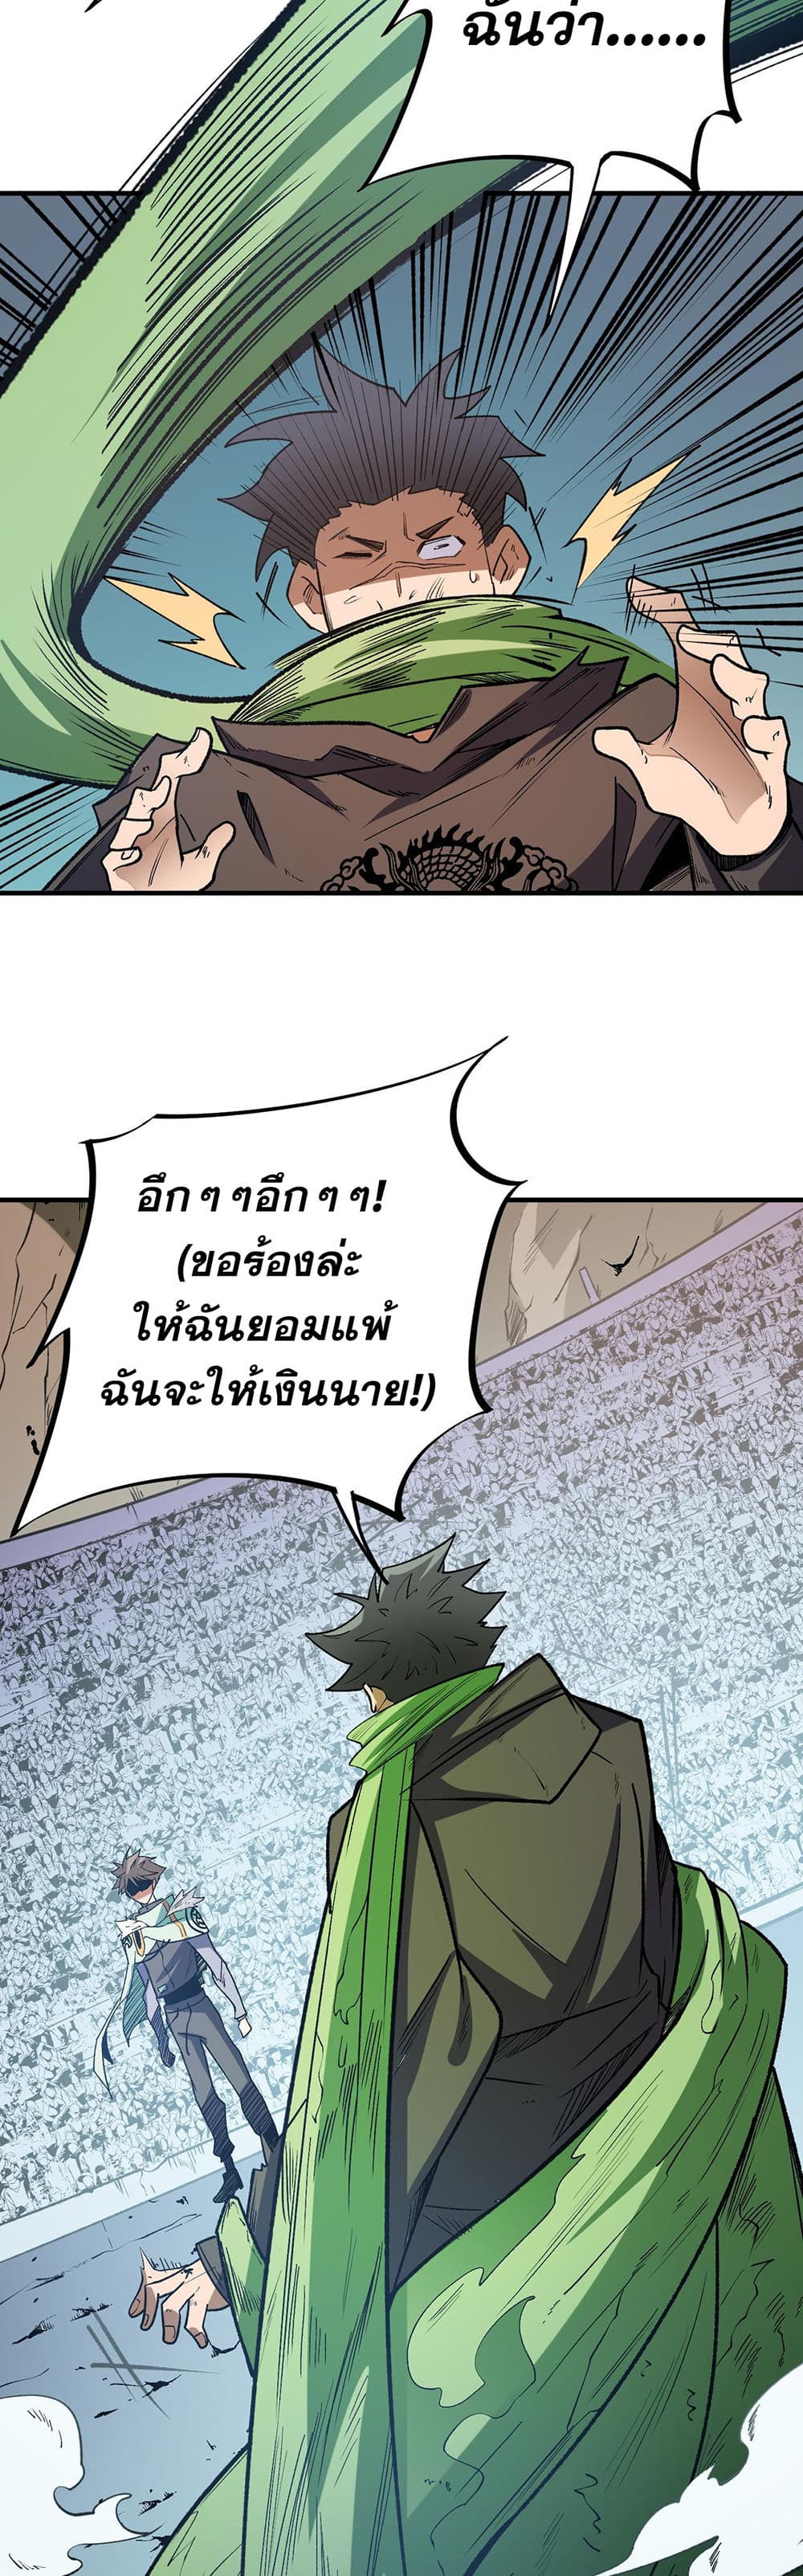 Job Changing for the Entire Population: The Jobless Me Will Terminate the Gods ฉันคือผู้เล่นไร้อาชีพที่สังหารเหล่าเทพ 29-29